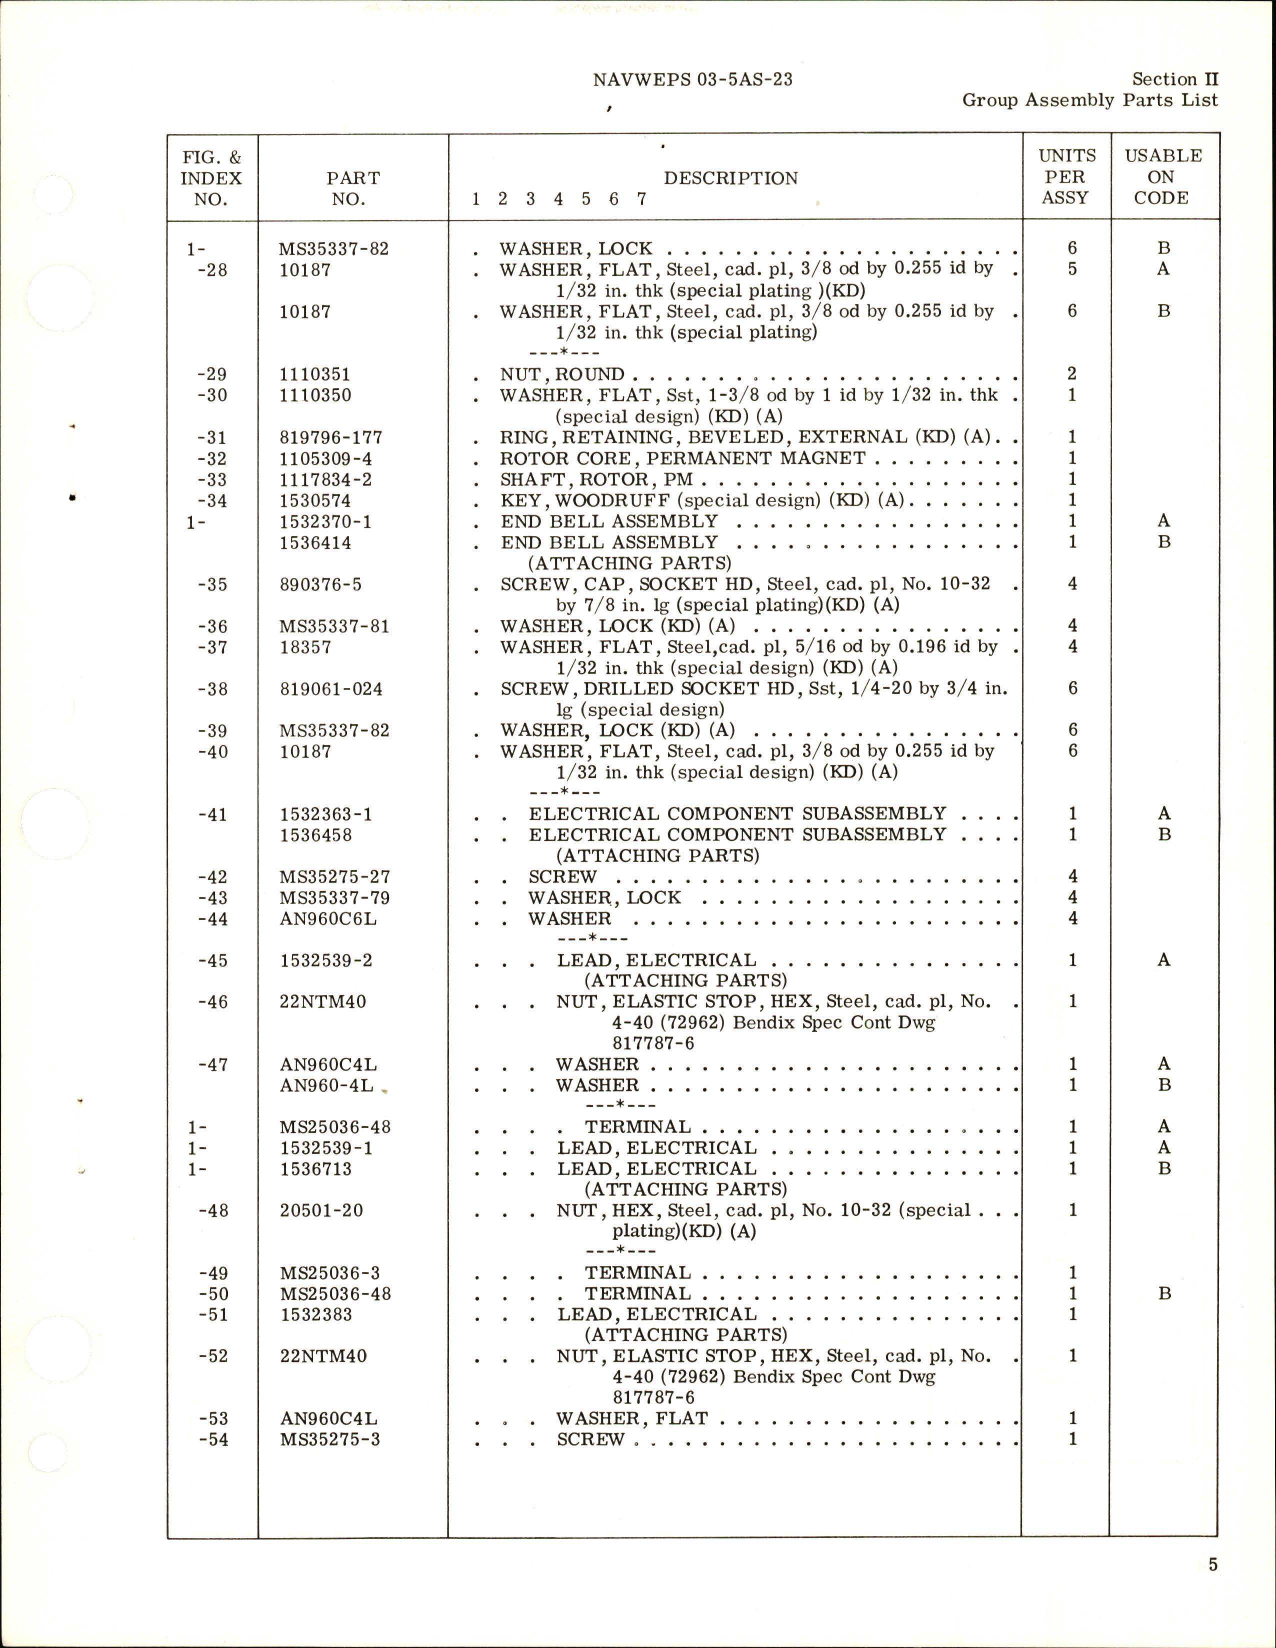 Sample page 7 from AirCorps Library document: Illustrated Parts Breakdown for AC Generator - Types 28B95-9-A and 28B95-15-A